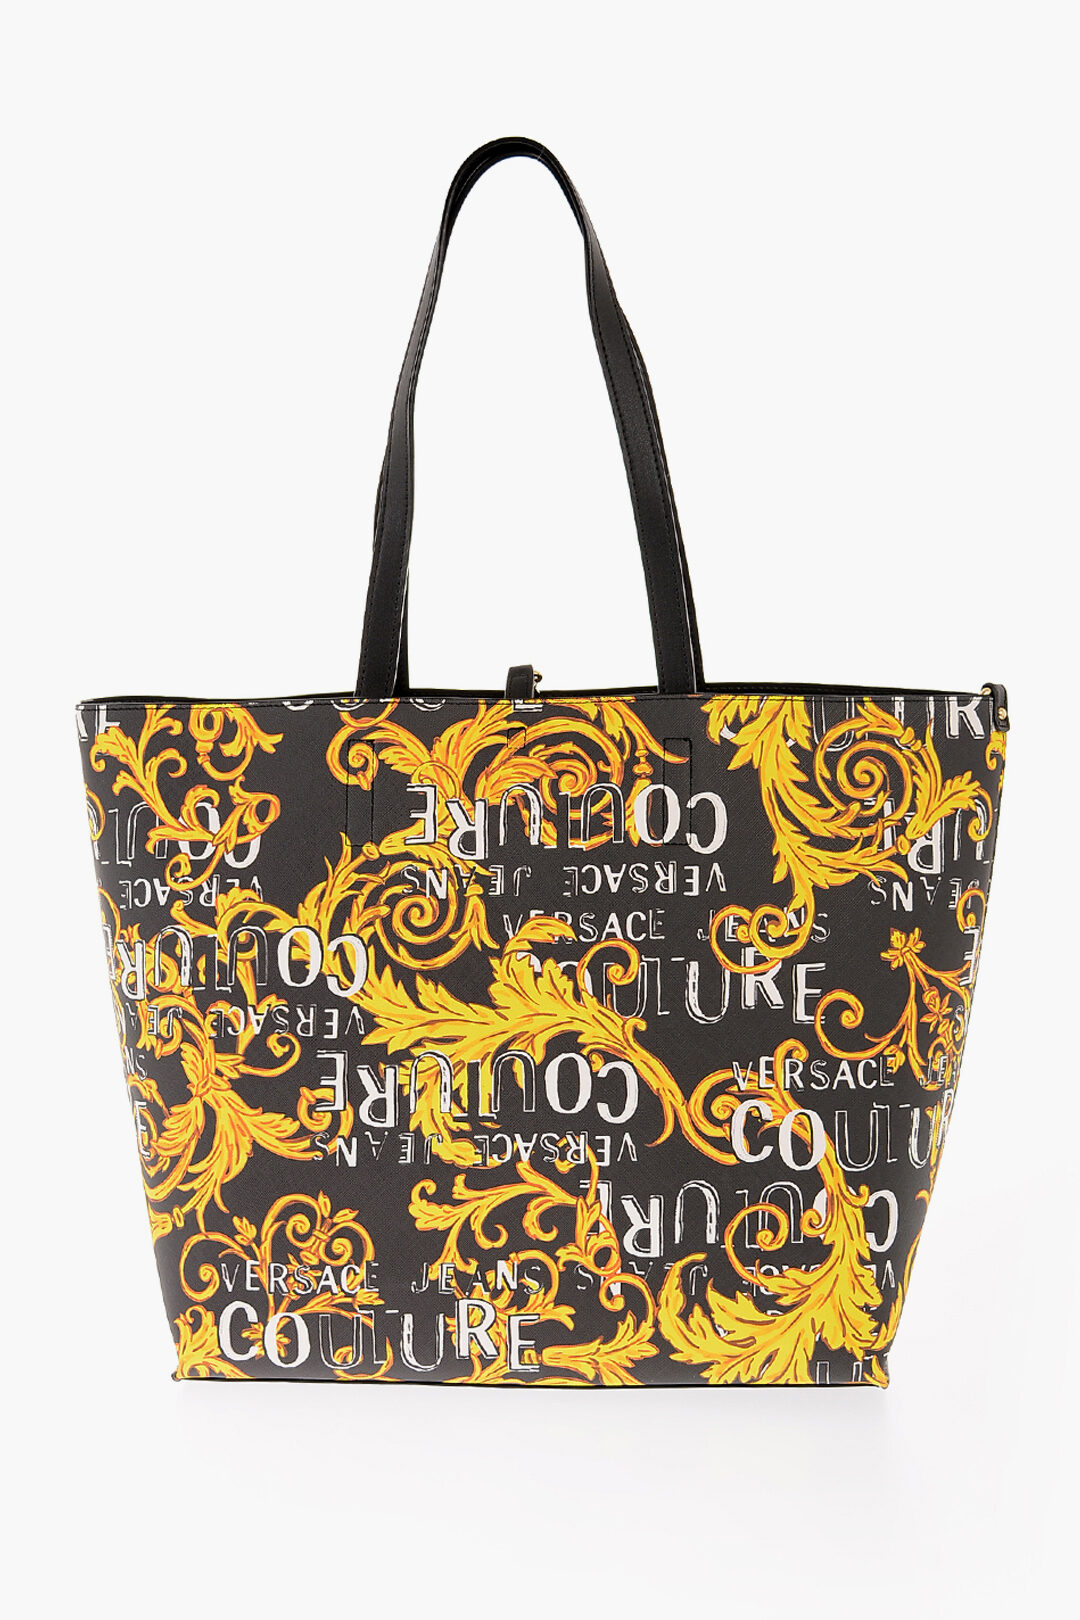 Versace Versace Allover Large Tote Bag for Women